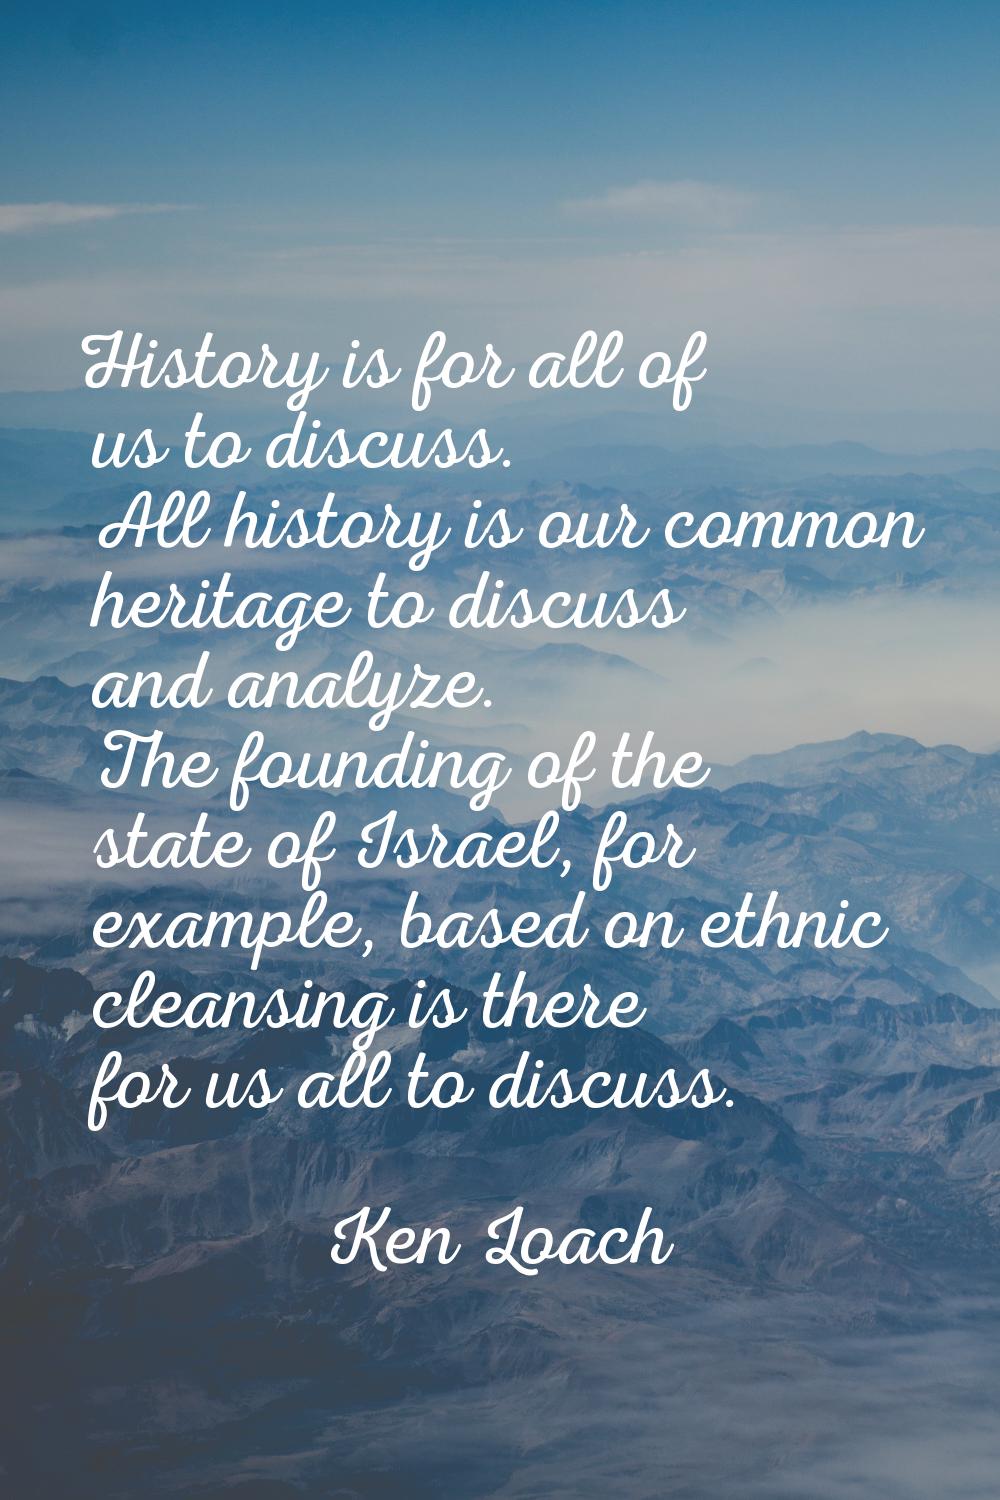 History is for all of us to discuss. All history is our common heritage to discuss and analyze. The